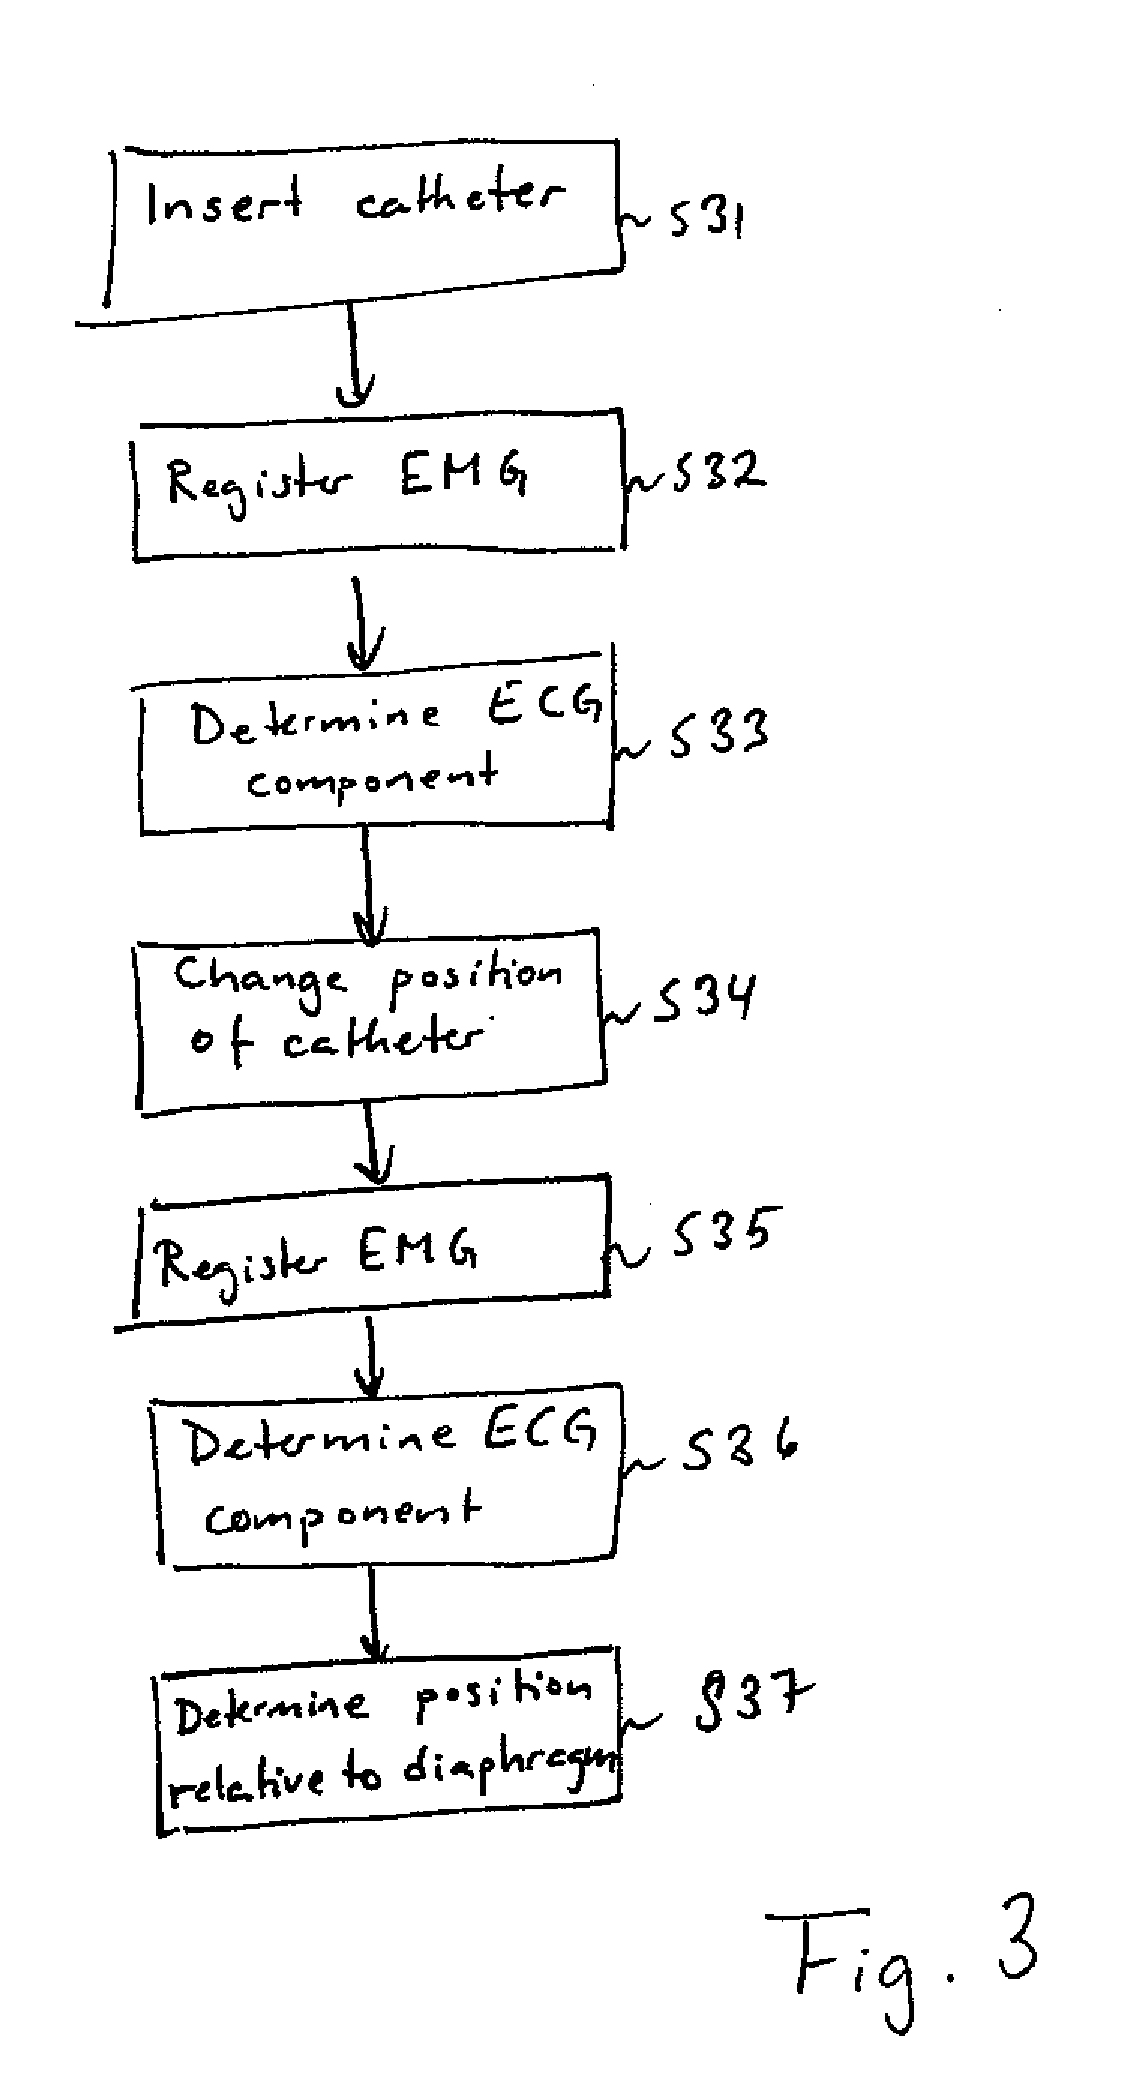 Catheter positioning method and computerized control unit for implementing the method